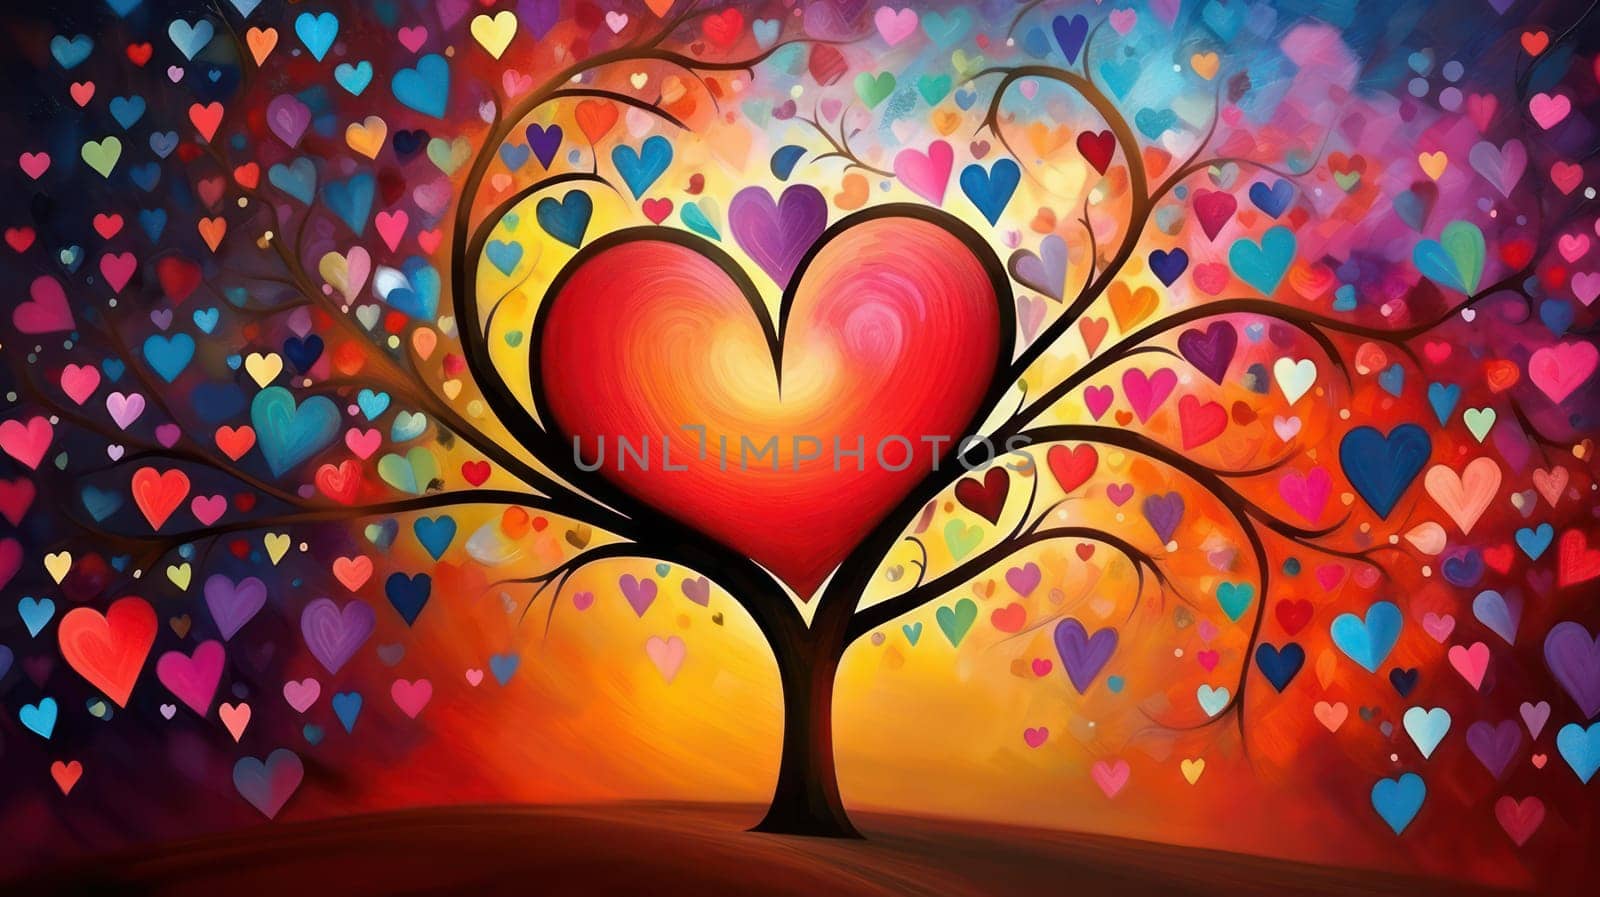 Romantic Love: A Whimsical Heart-shaped Tree of Emotions and Beauty, Illustration on a Red Abstract Background